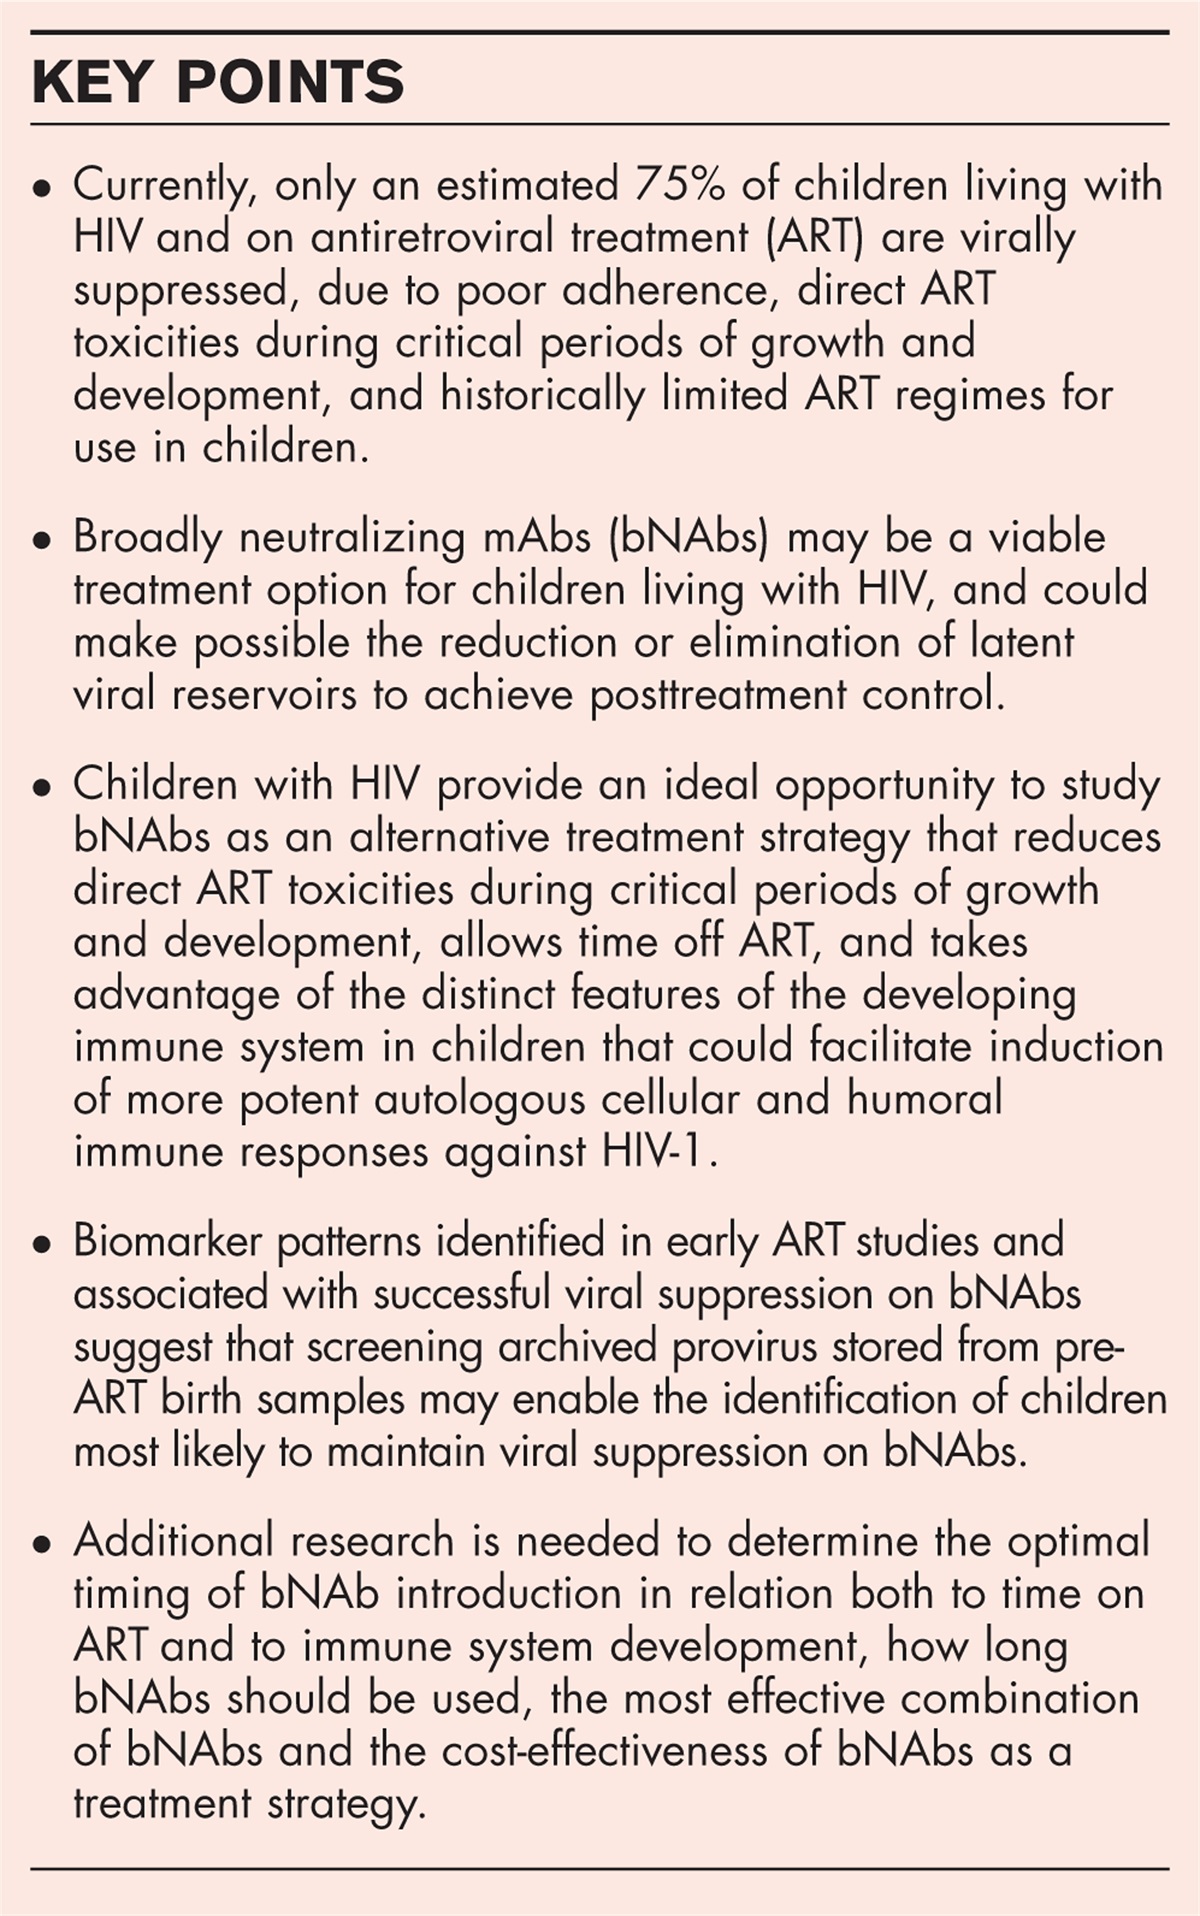 Antibody interventions in HIV: broadly neutralizing mAbs in children